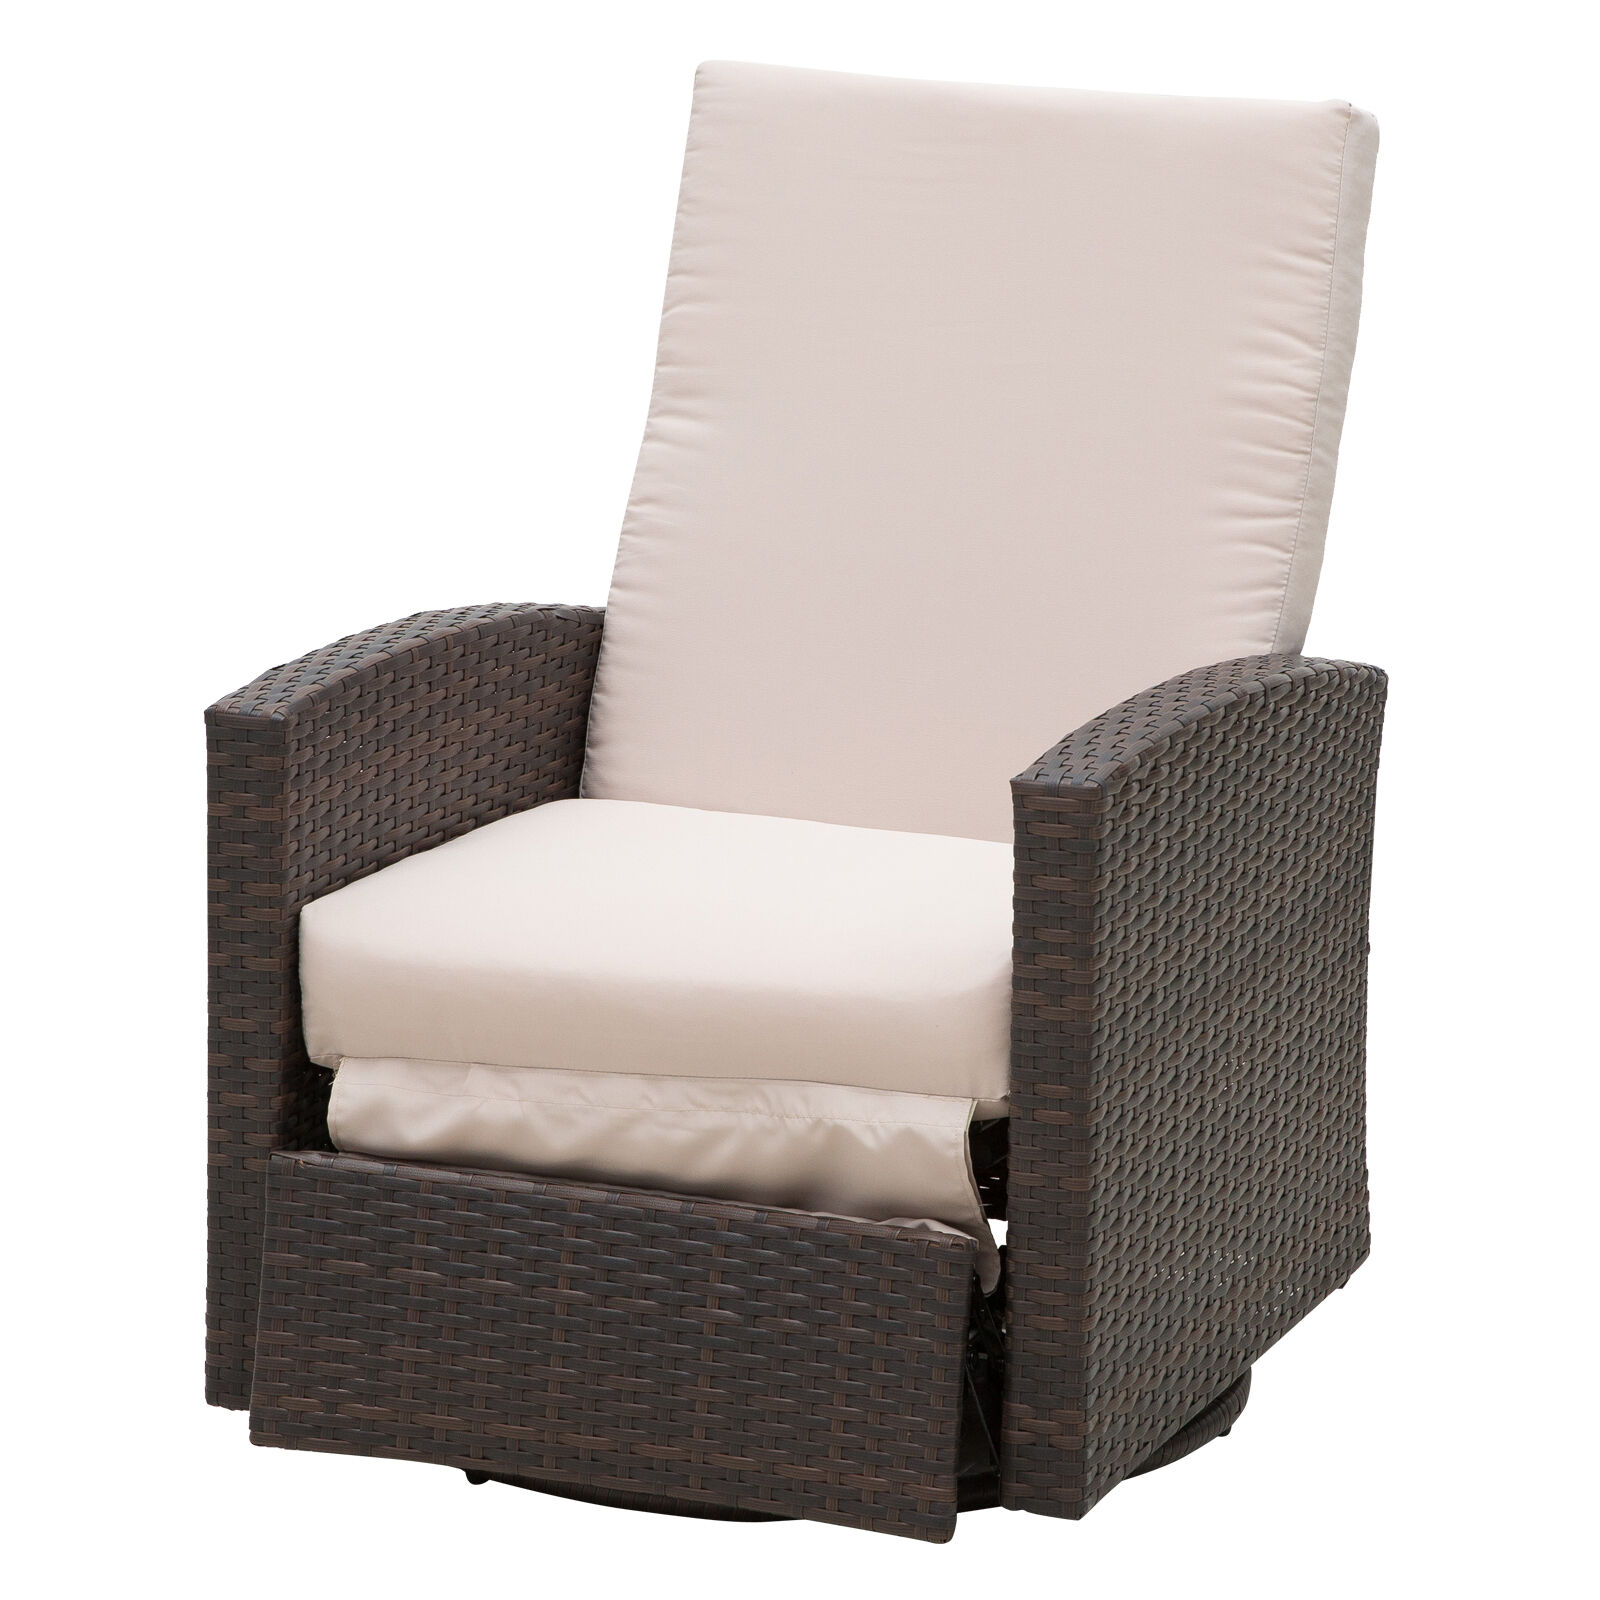 Outsunny Patio Lounge Chair Recliner with Footrest Comfortable Outdoor Seating   Aosom.com